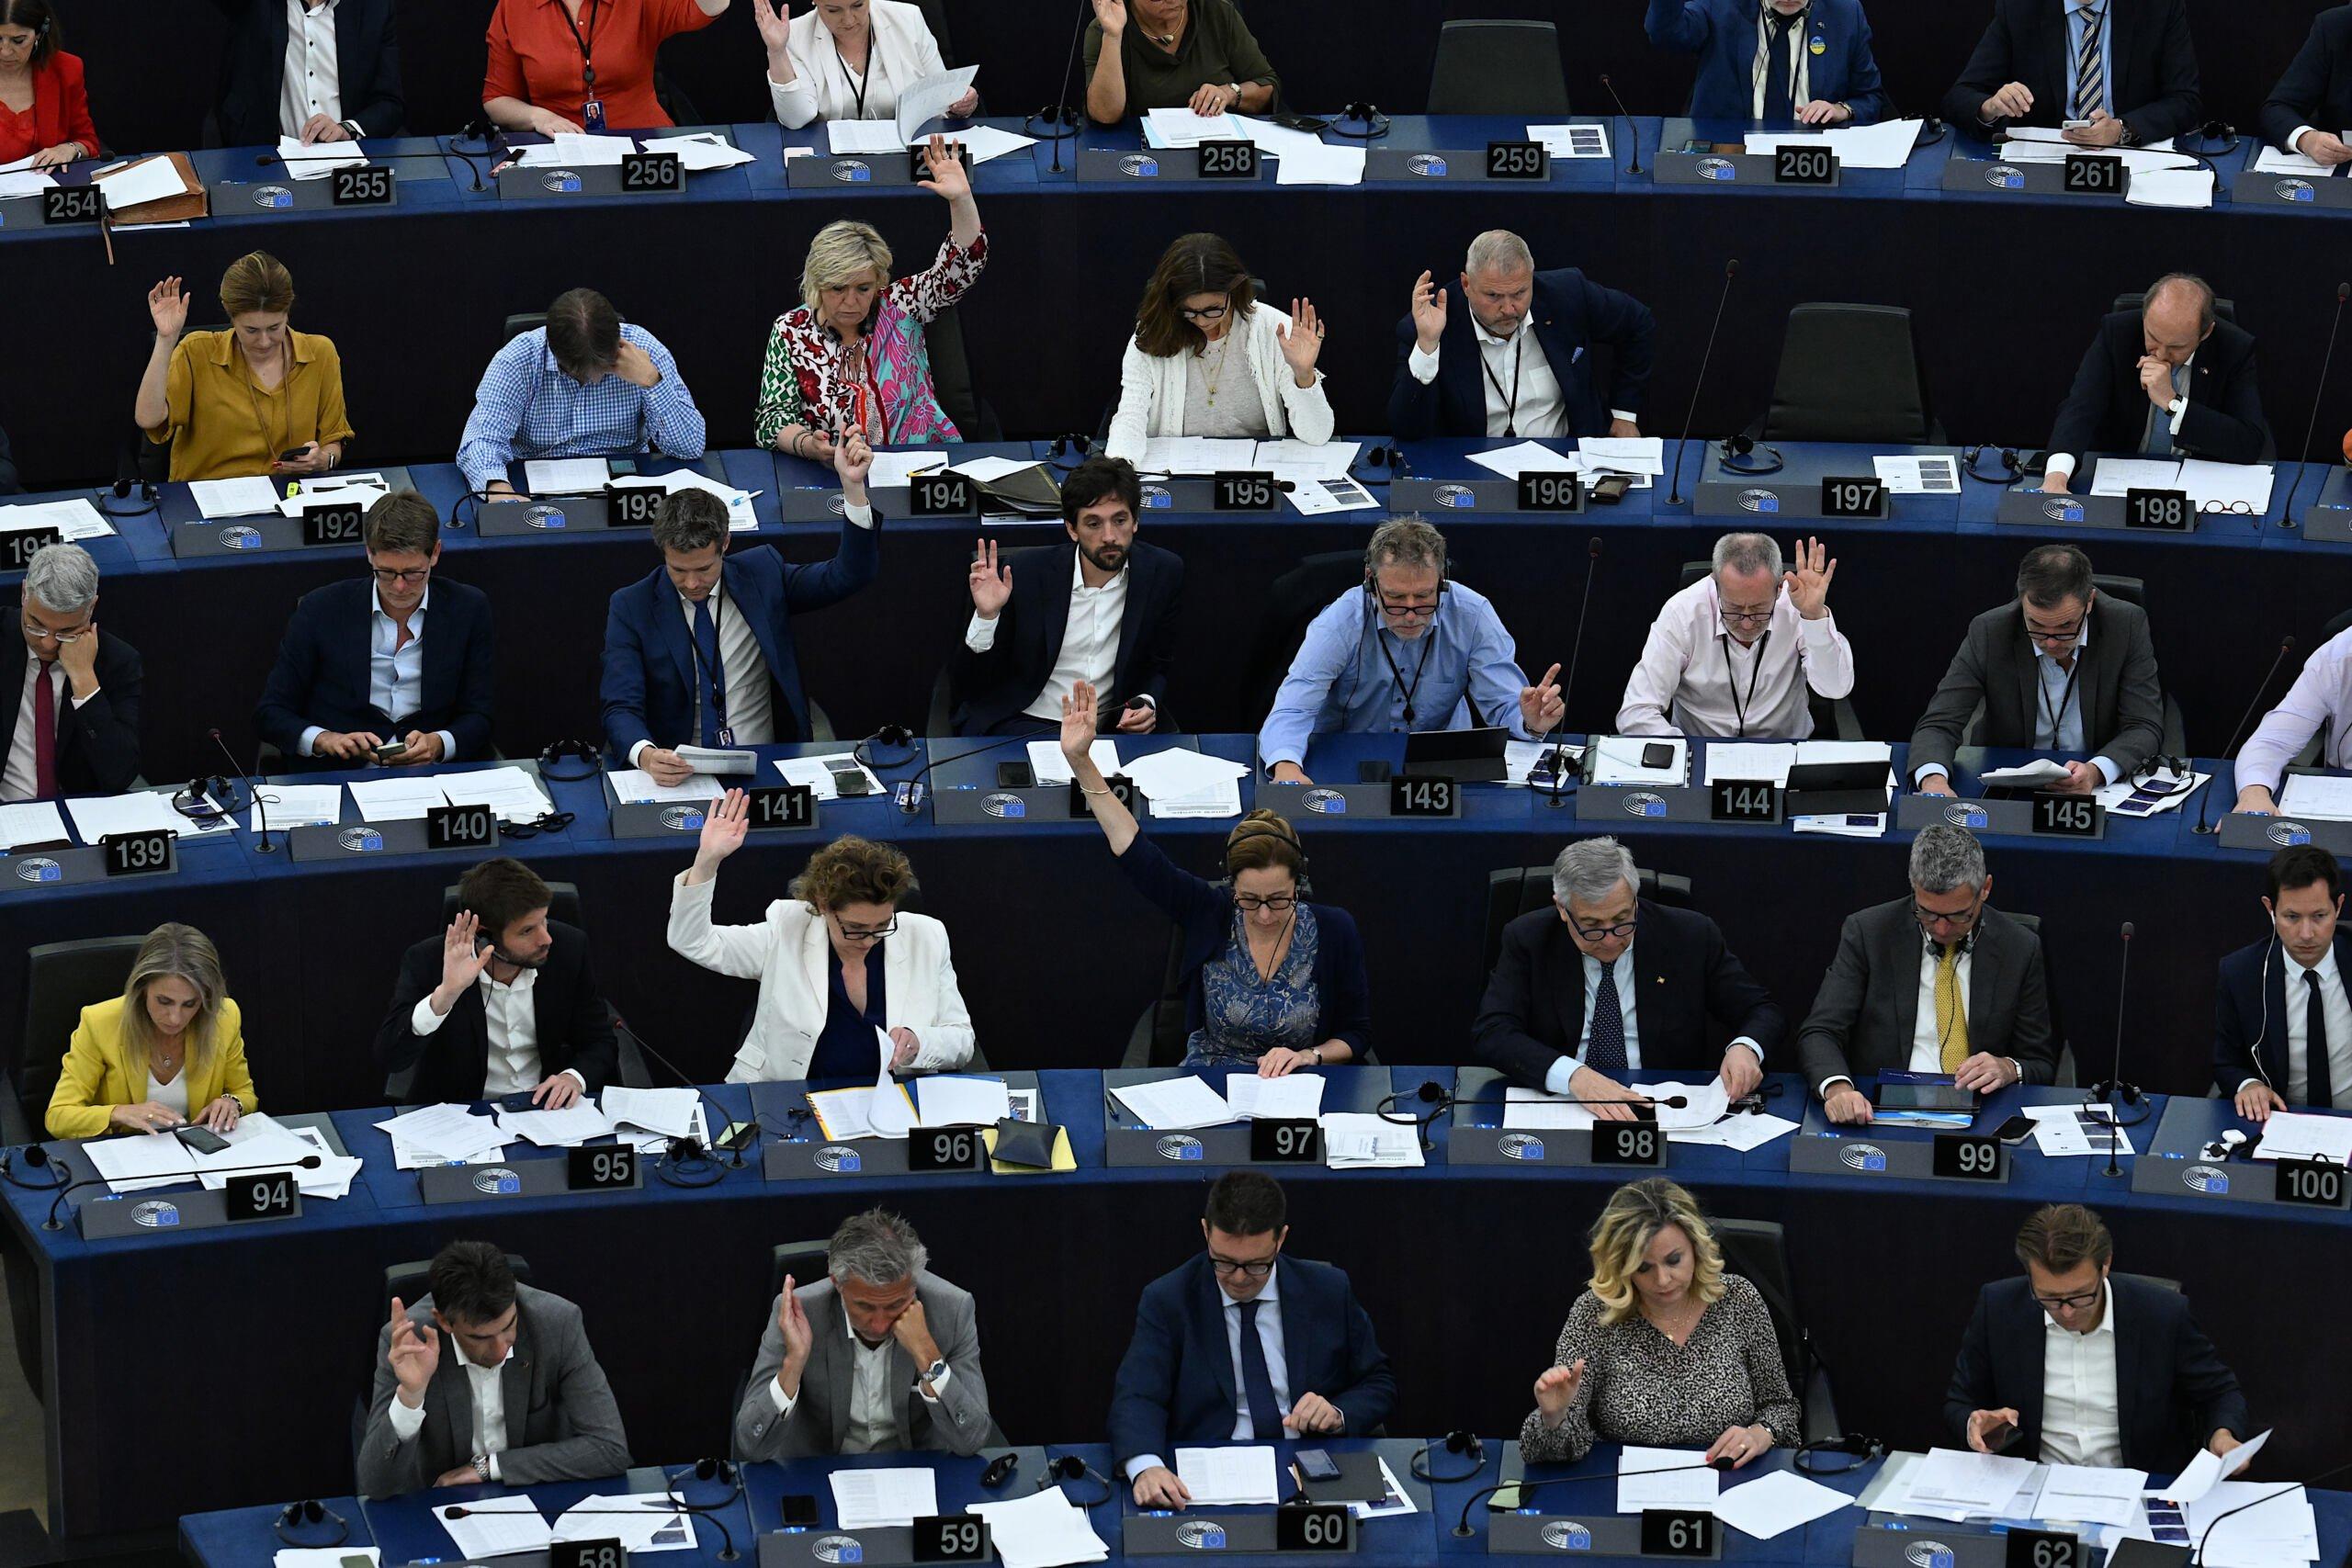 Members of the European Parliament take part in a voting session on the granting of a « green » label to gas and nuclear investments decided by the European Commission, in Strasbourg, eastern France, on July 6, 2022. - The controversial text, presented in January by the Commission, classifies as "sustainable" some investments for electricity production in nuclear power plants - which do not emit CO2 - or gas-fired power plants, provided that they use the most advanced technologies. This classification (known as taxonomy) should help mobilize private funds for these projects. (Photo by PATRICK HERTZOG / AFP)